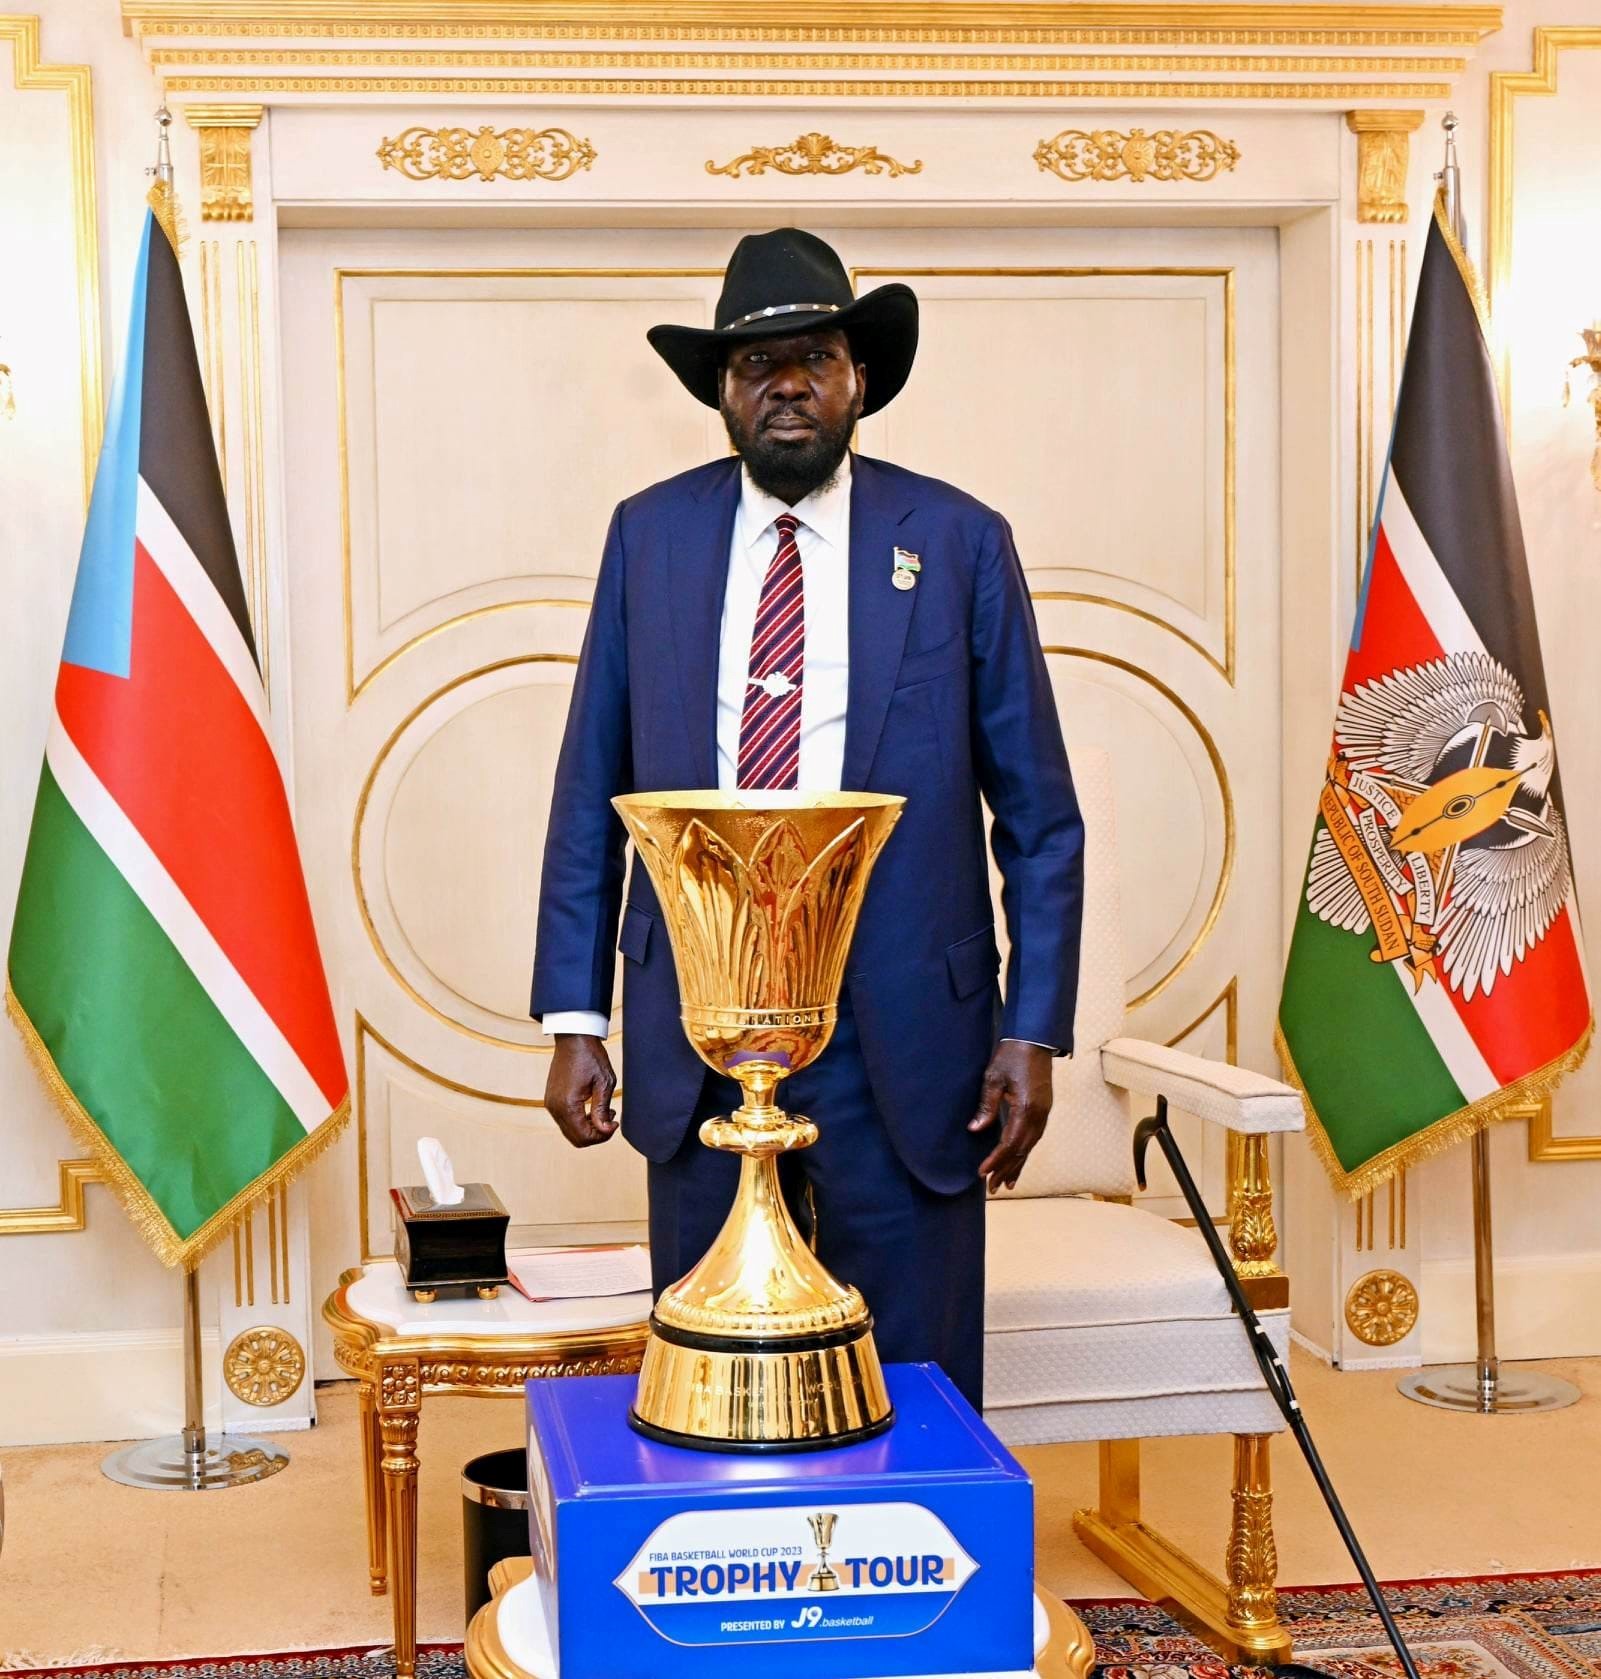 Kiir blesses basketball team as trophy jets on tour